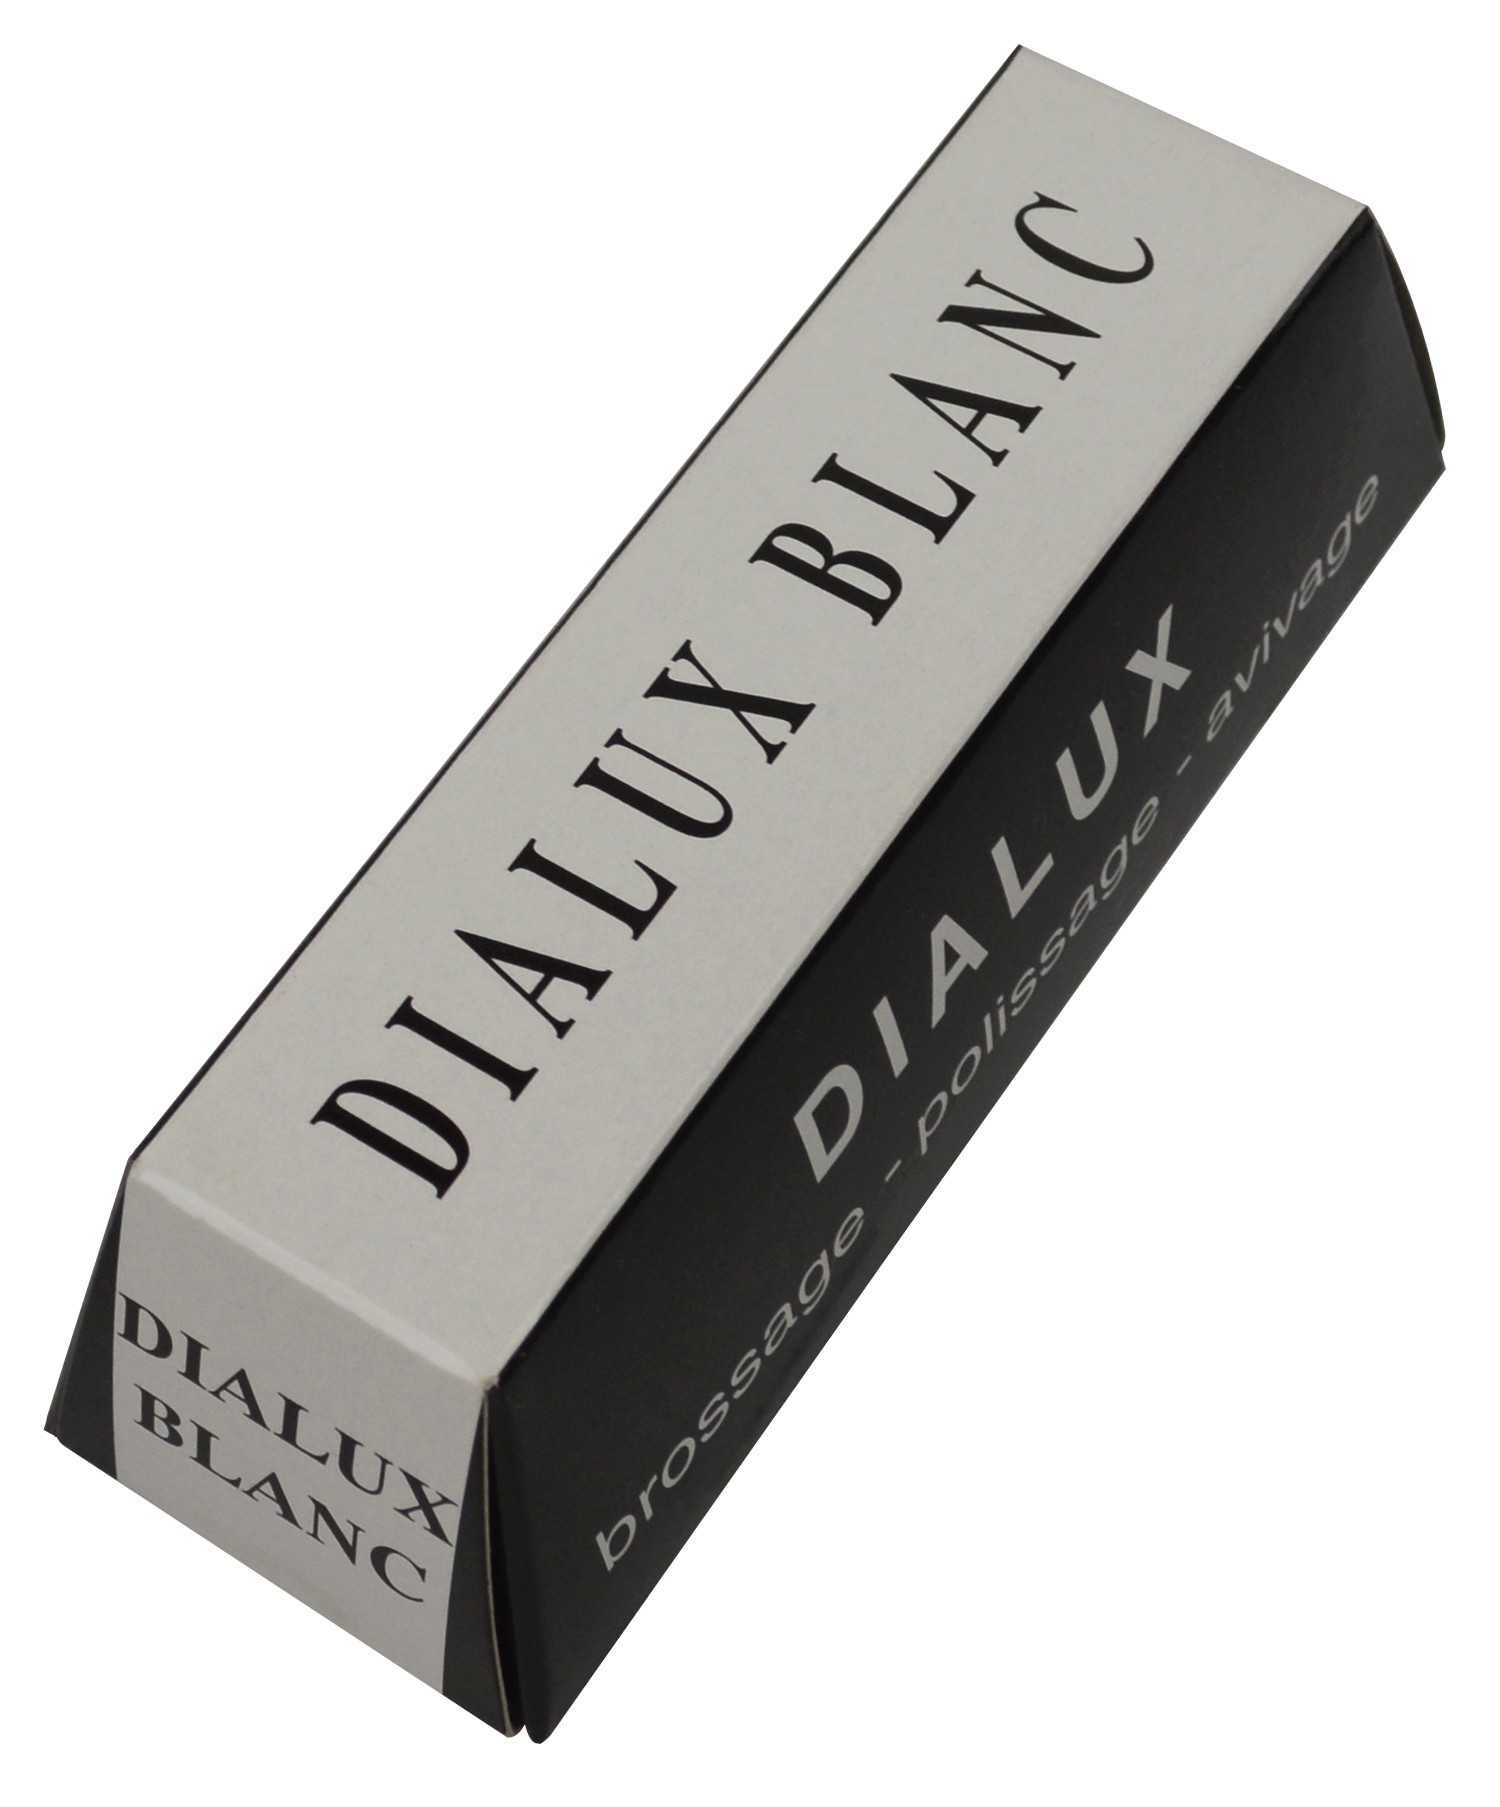 Dialux Polishing Rouge Polish Jewelry and Metals 6 Bars